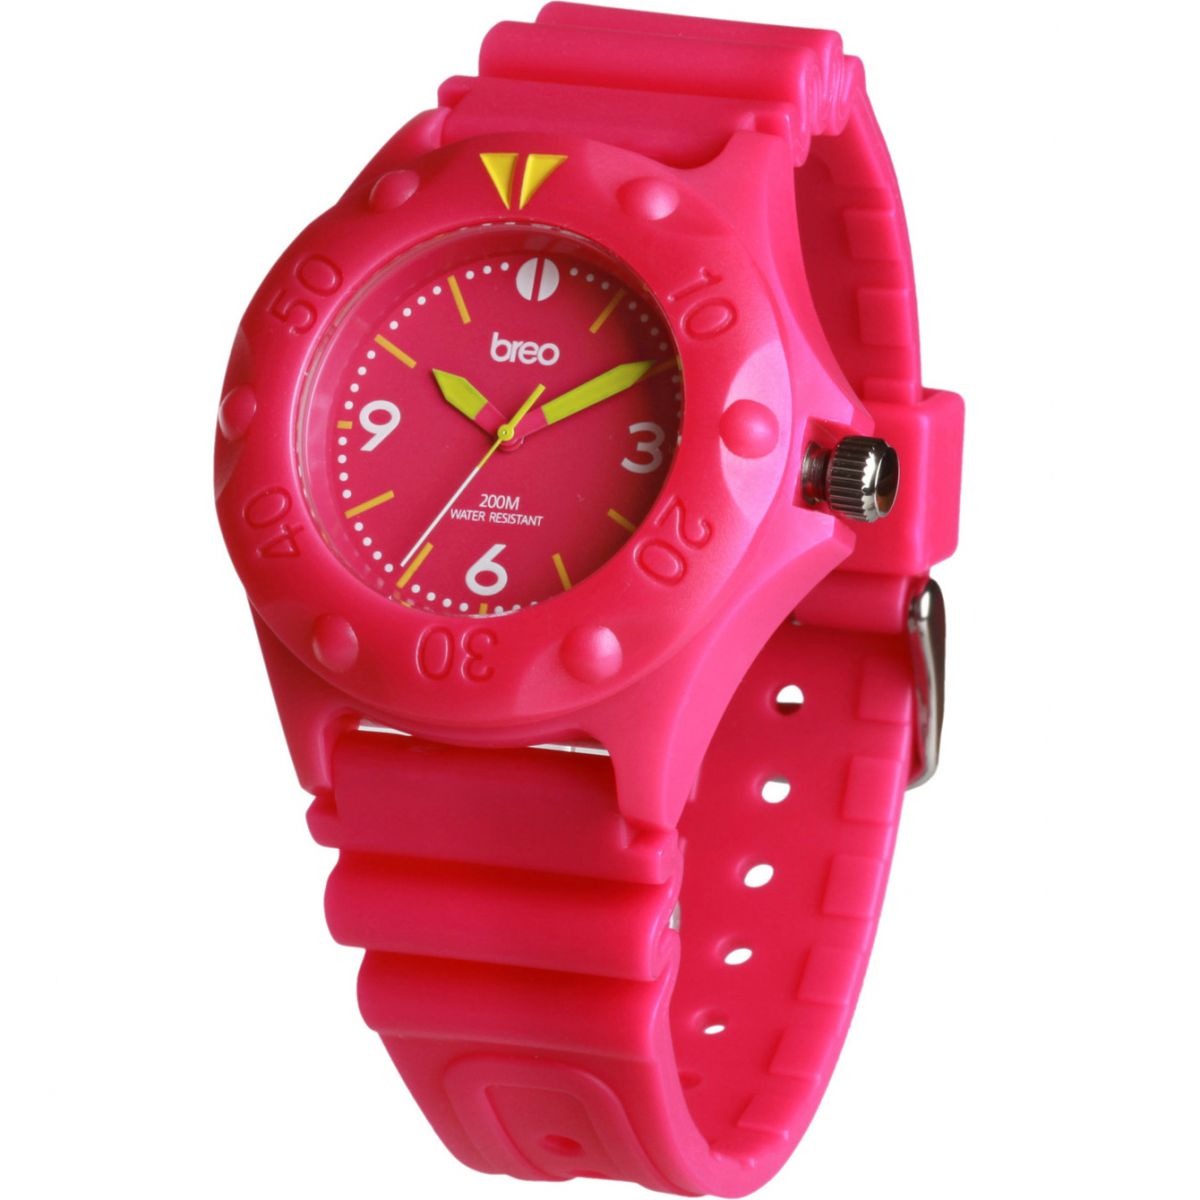 Breo - Watch Pink for Man from Watch Shop GOOFASH